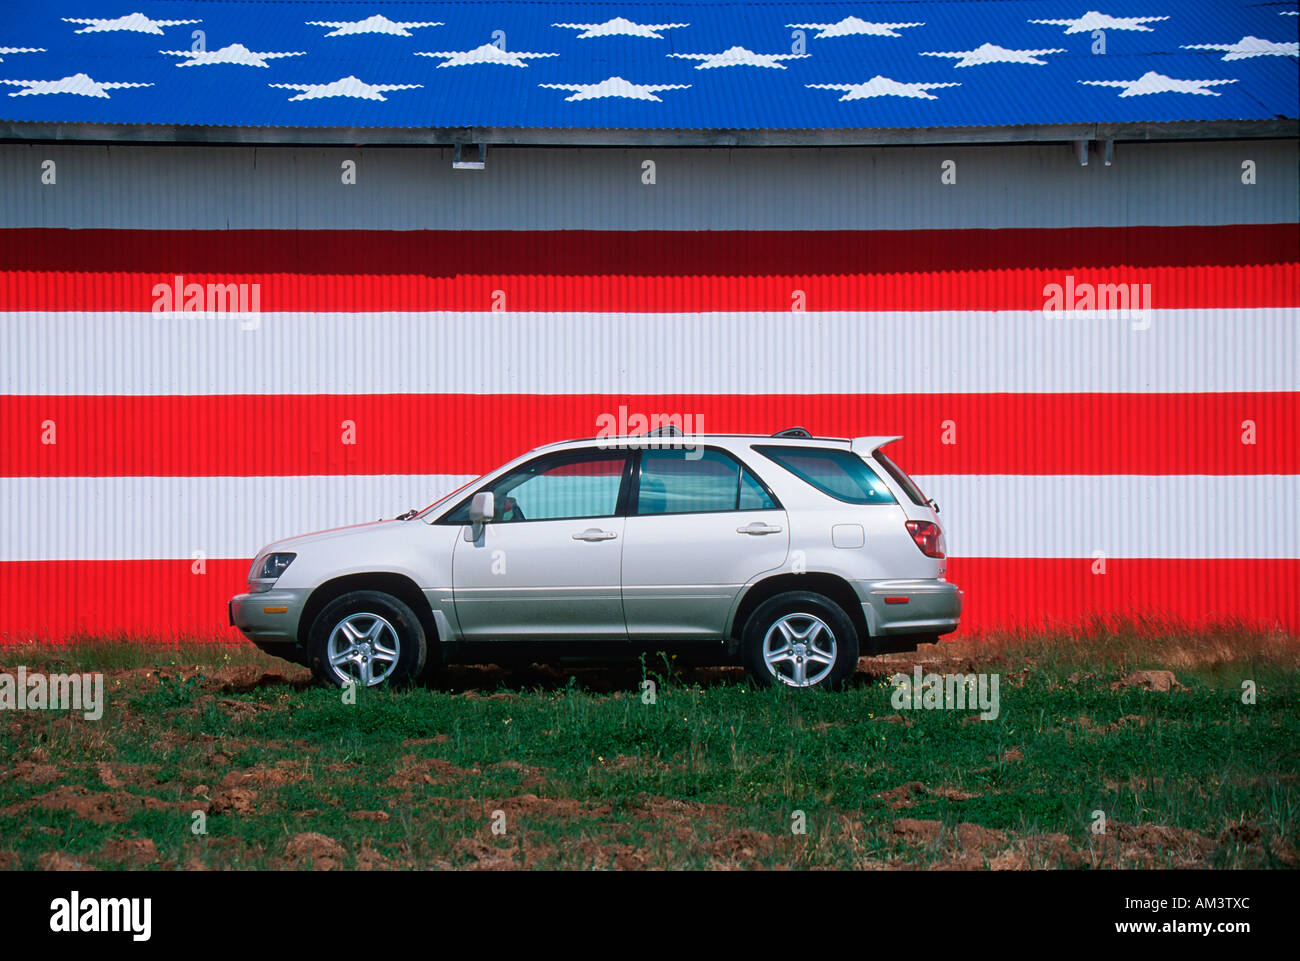 Joe Sohm s RX300 Lexus in front of a barn painted in red white and blue for the American Flag Stock Photo